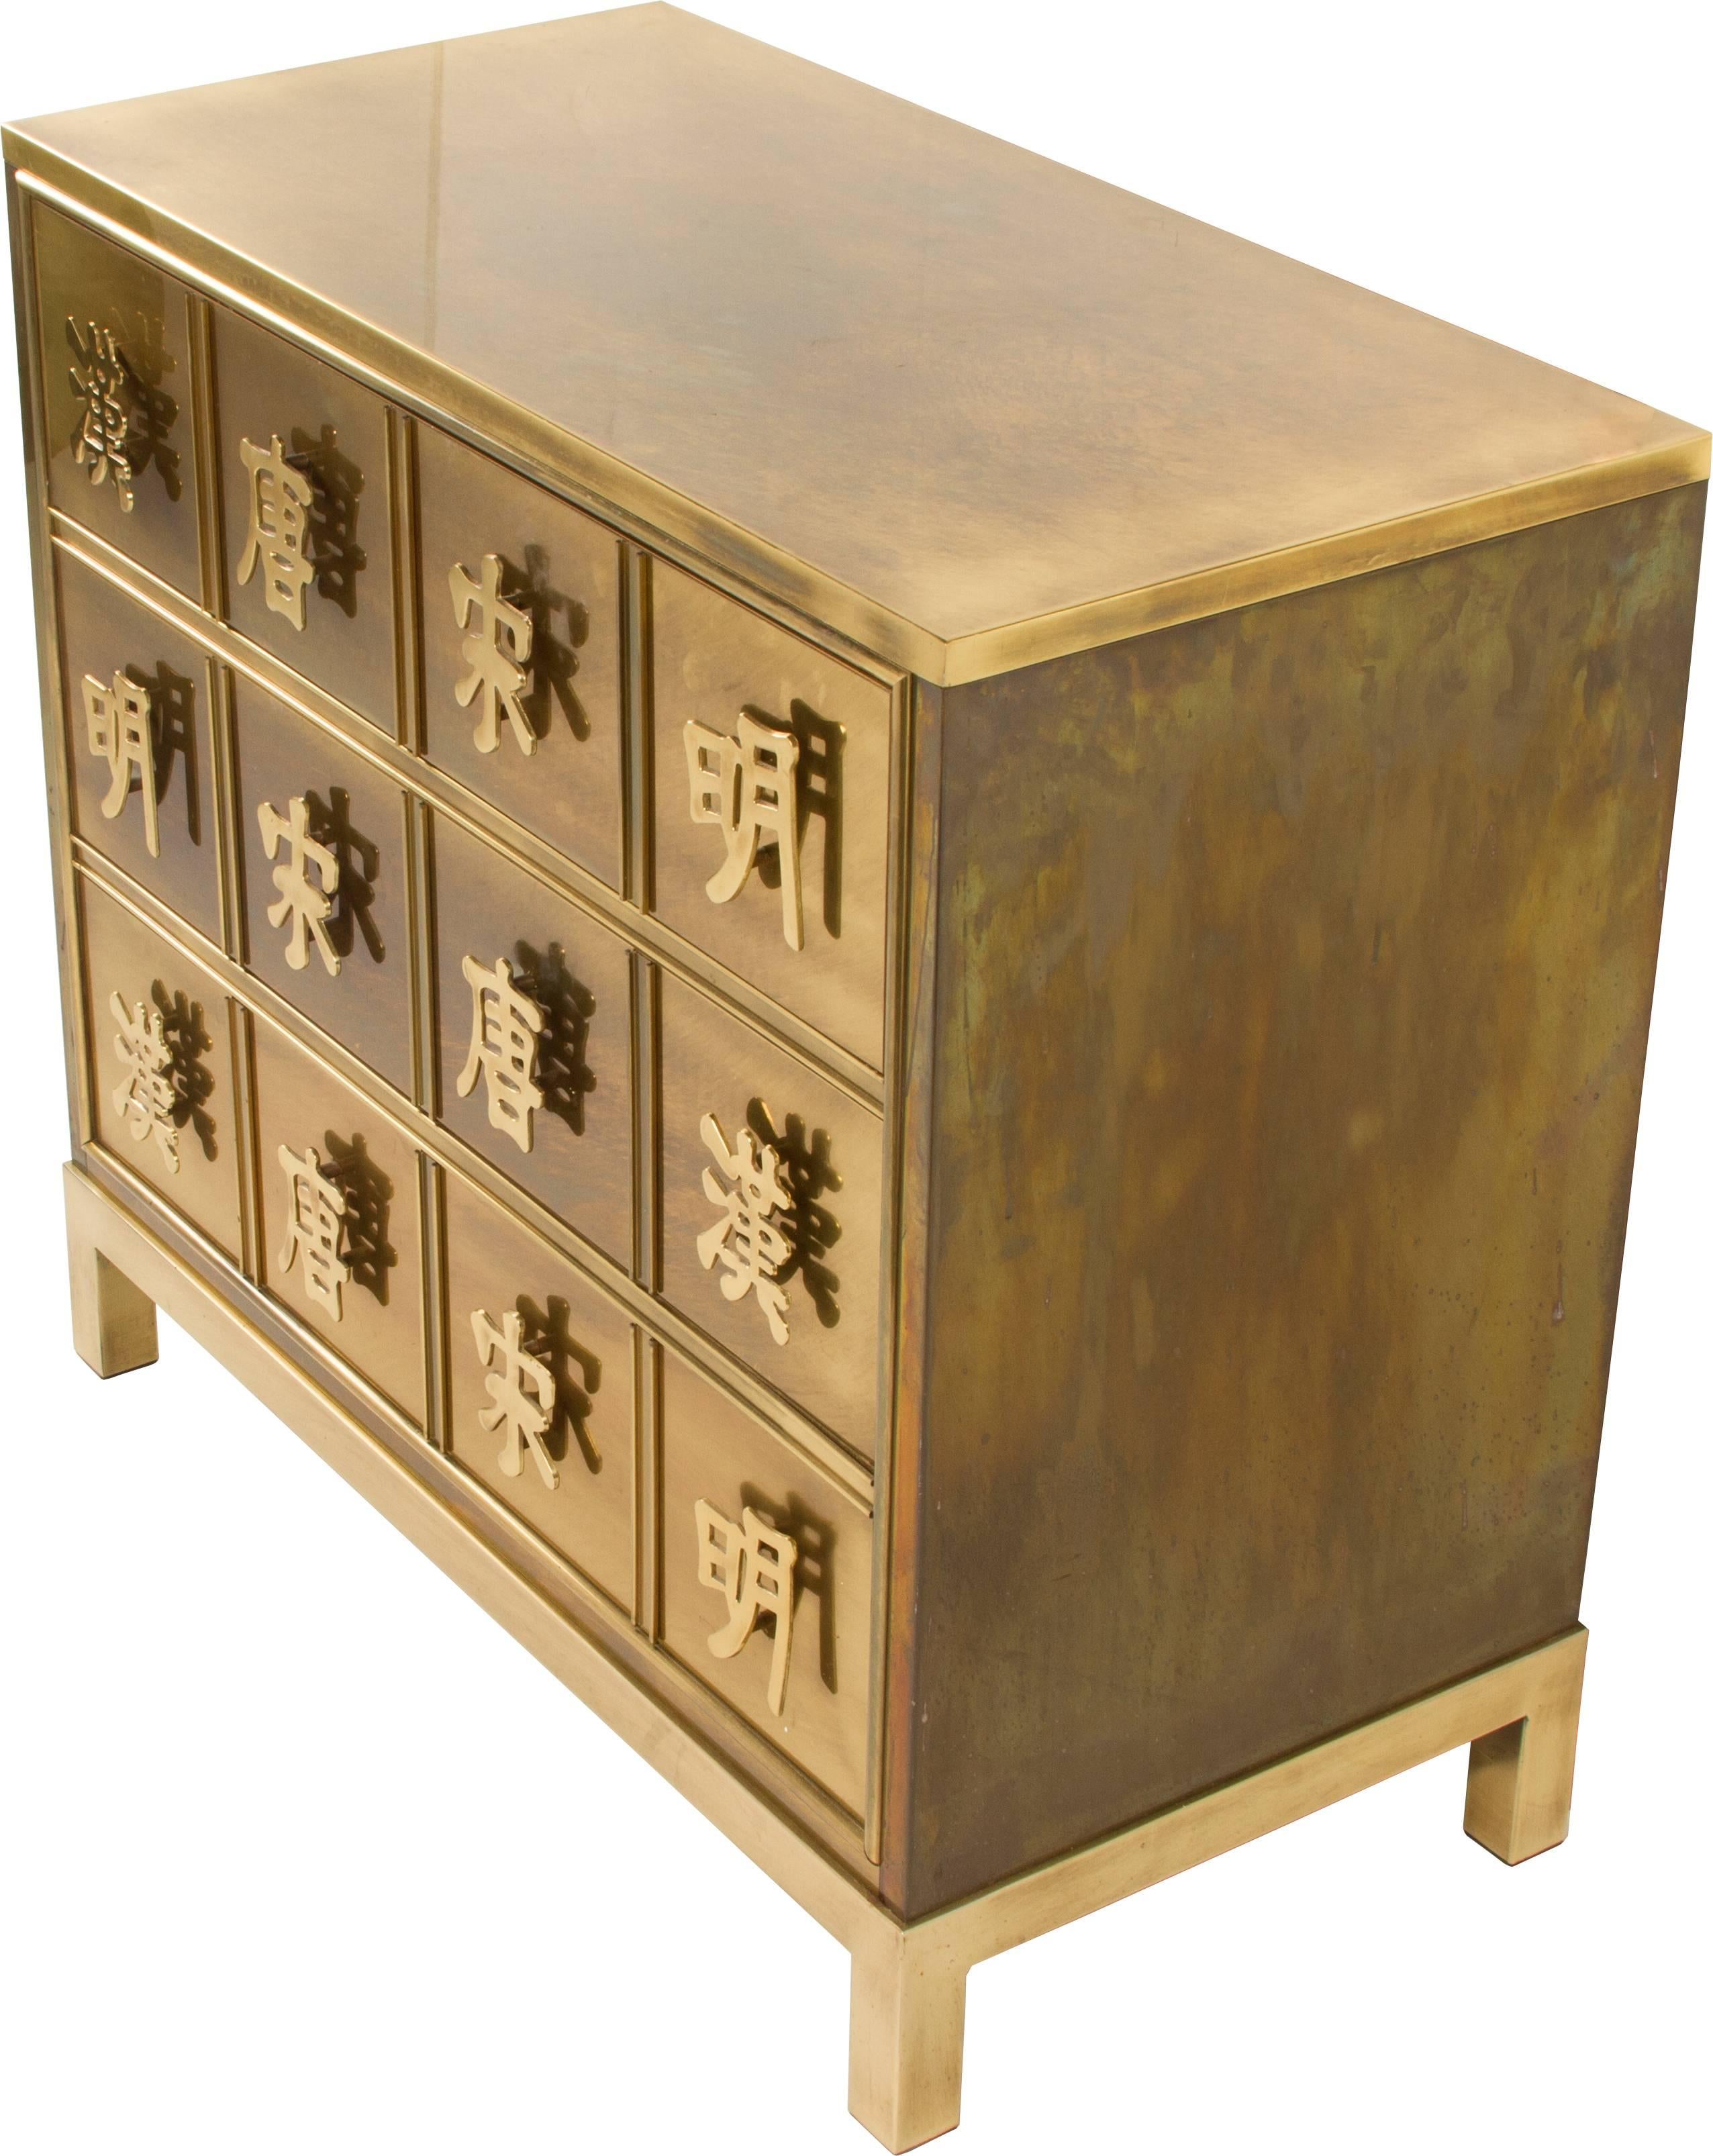 American Mastercraft Chest with Chinese Characters